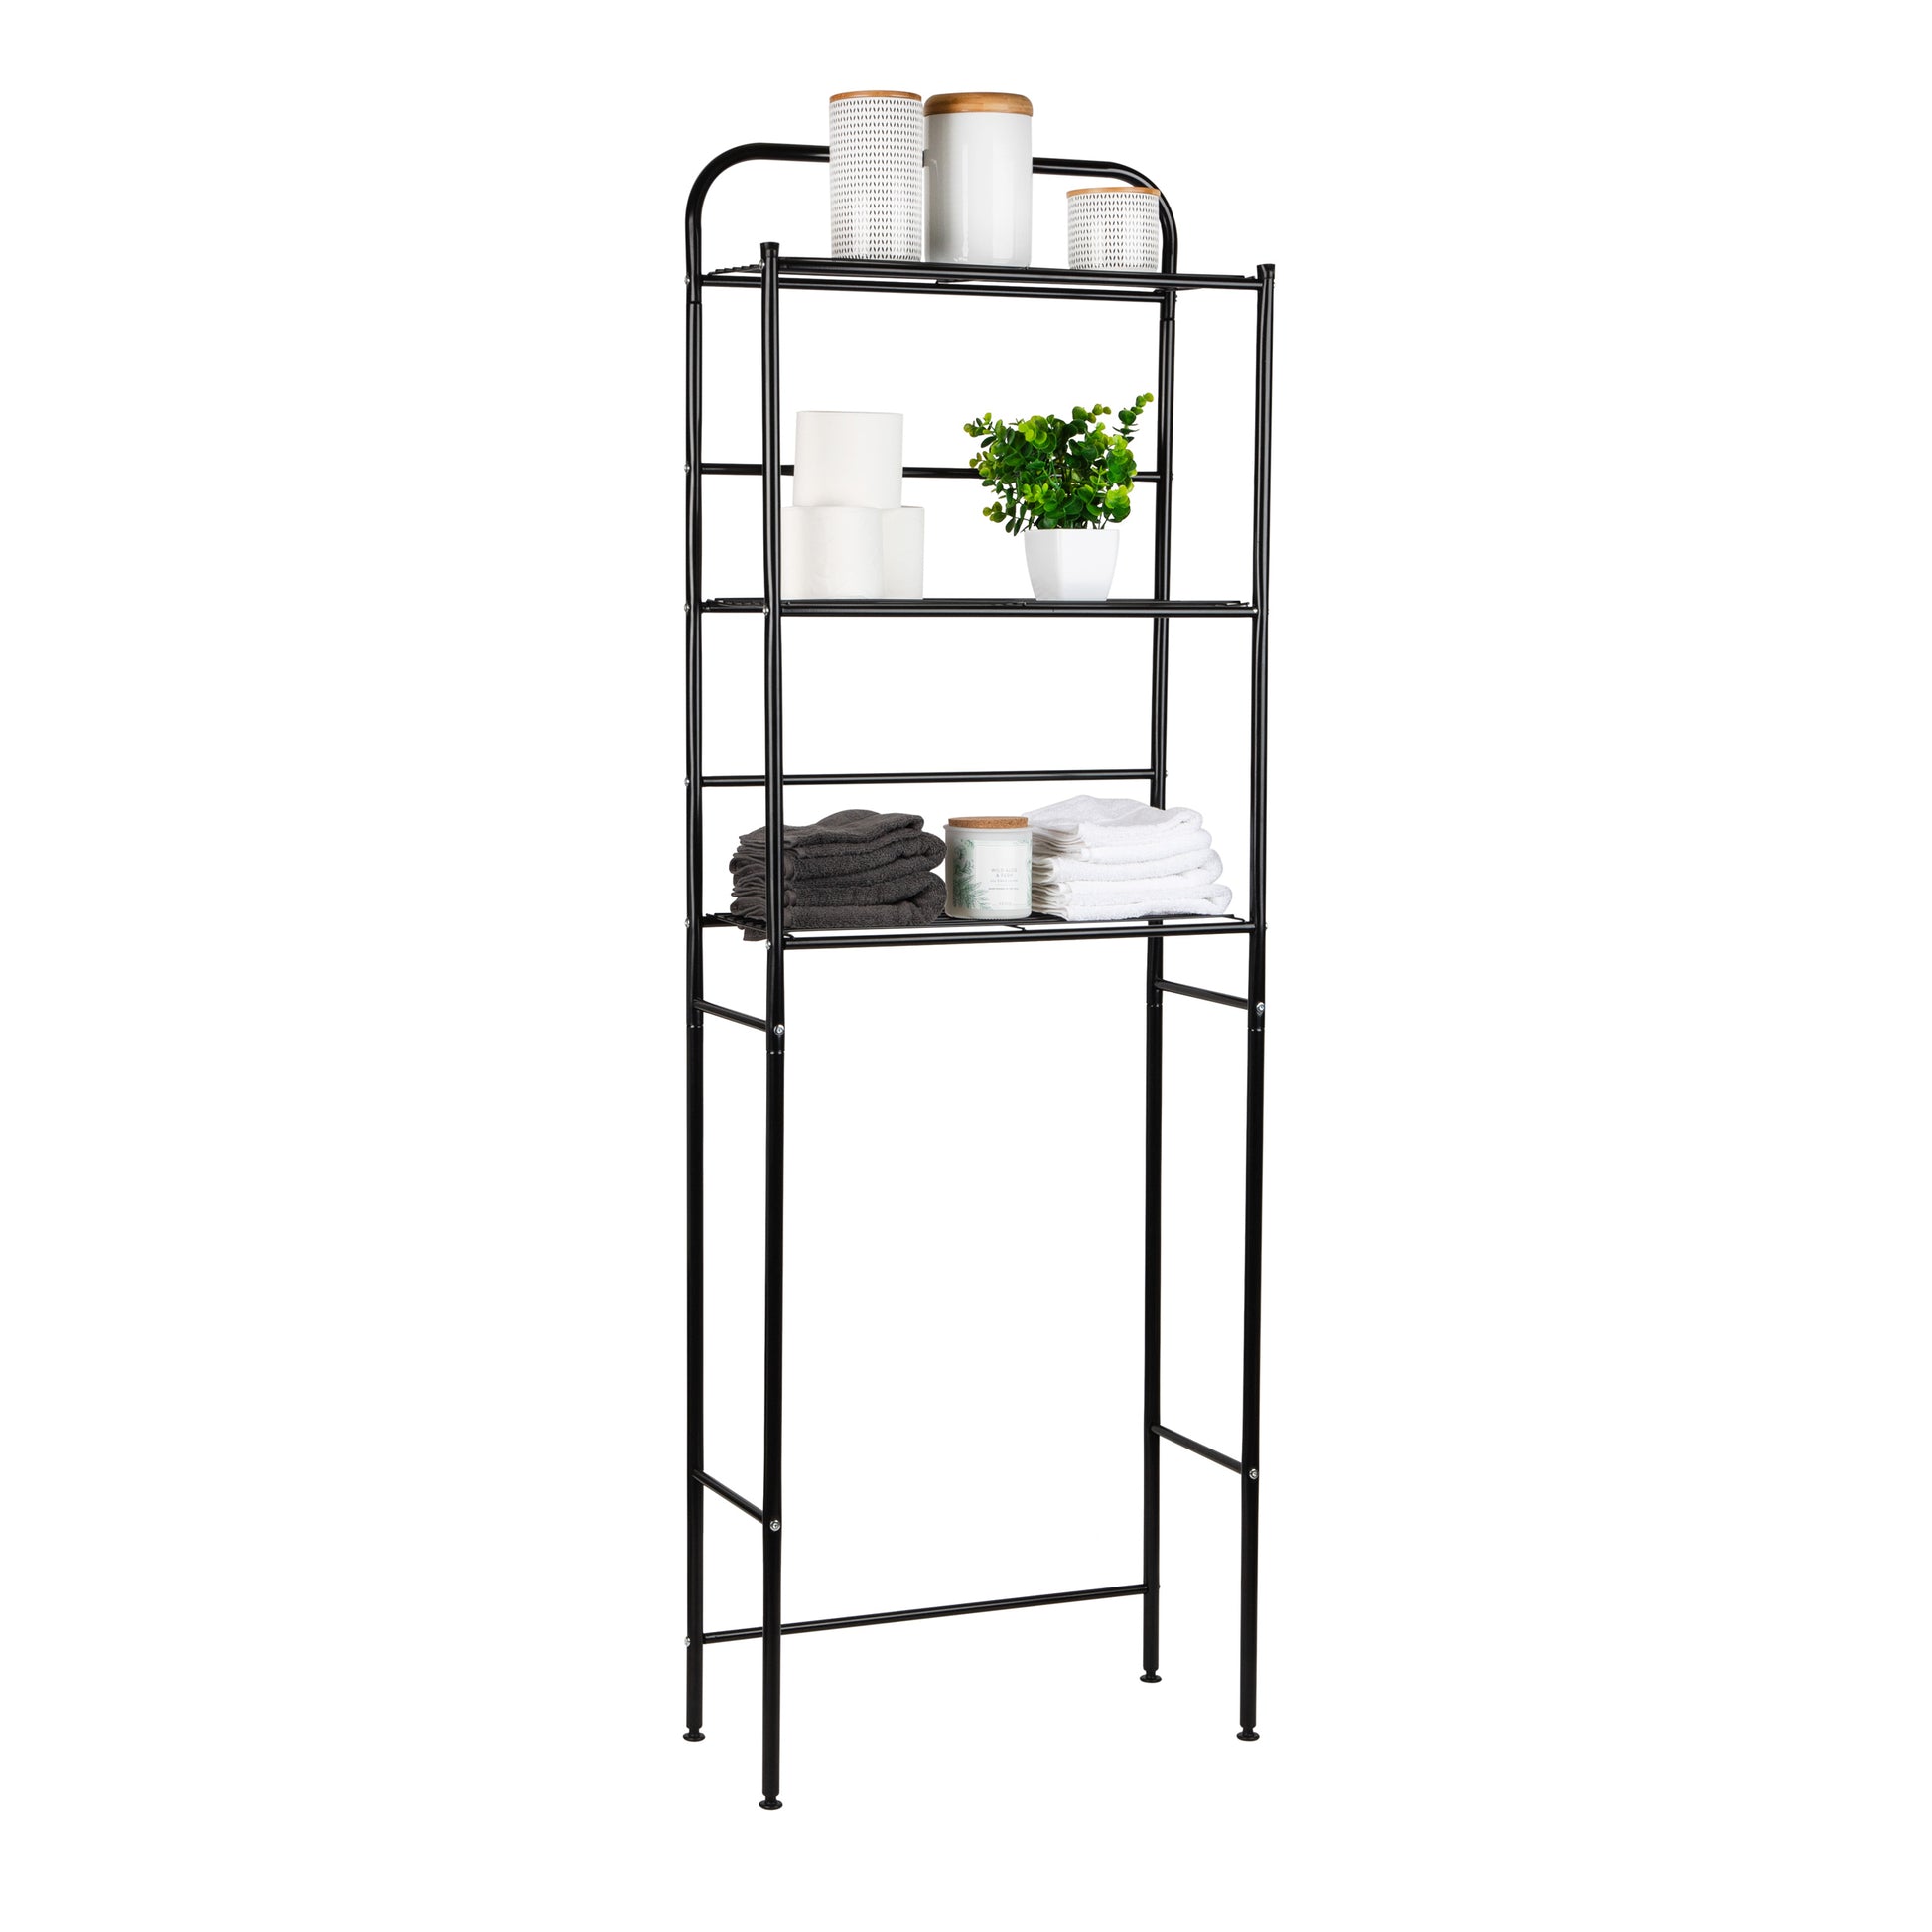 3 Shelf Metal Over The Toilet Space Saver And Organizer Black